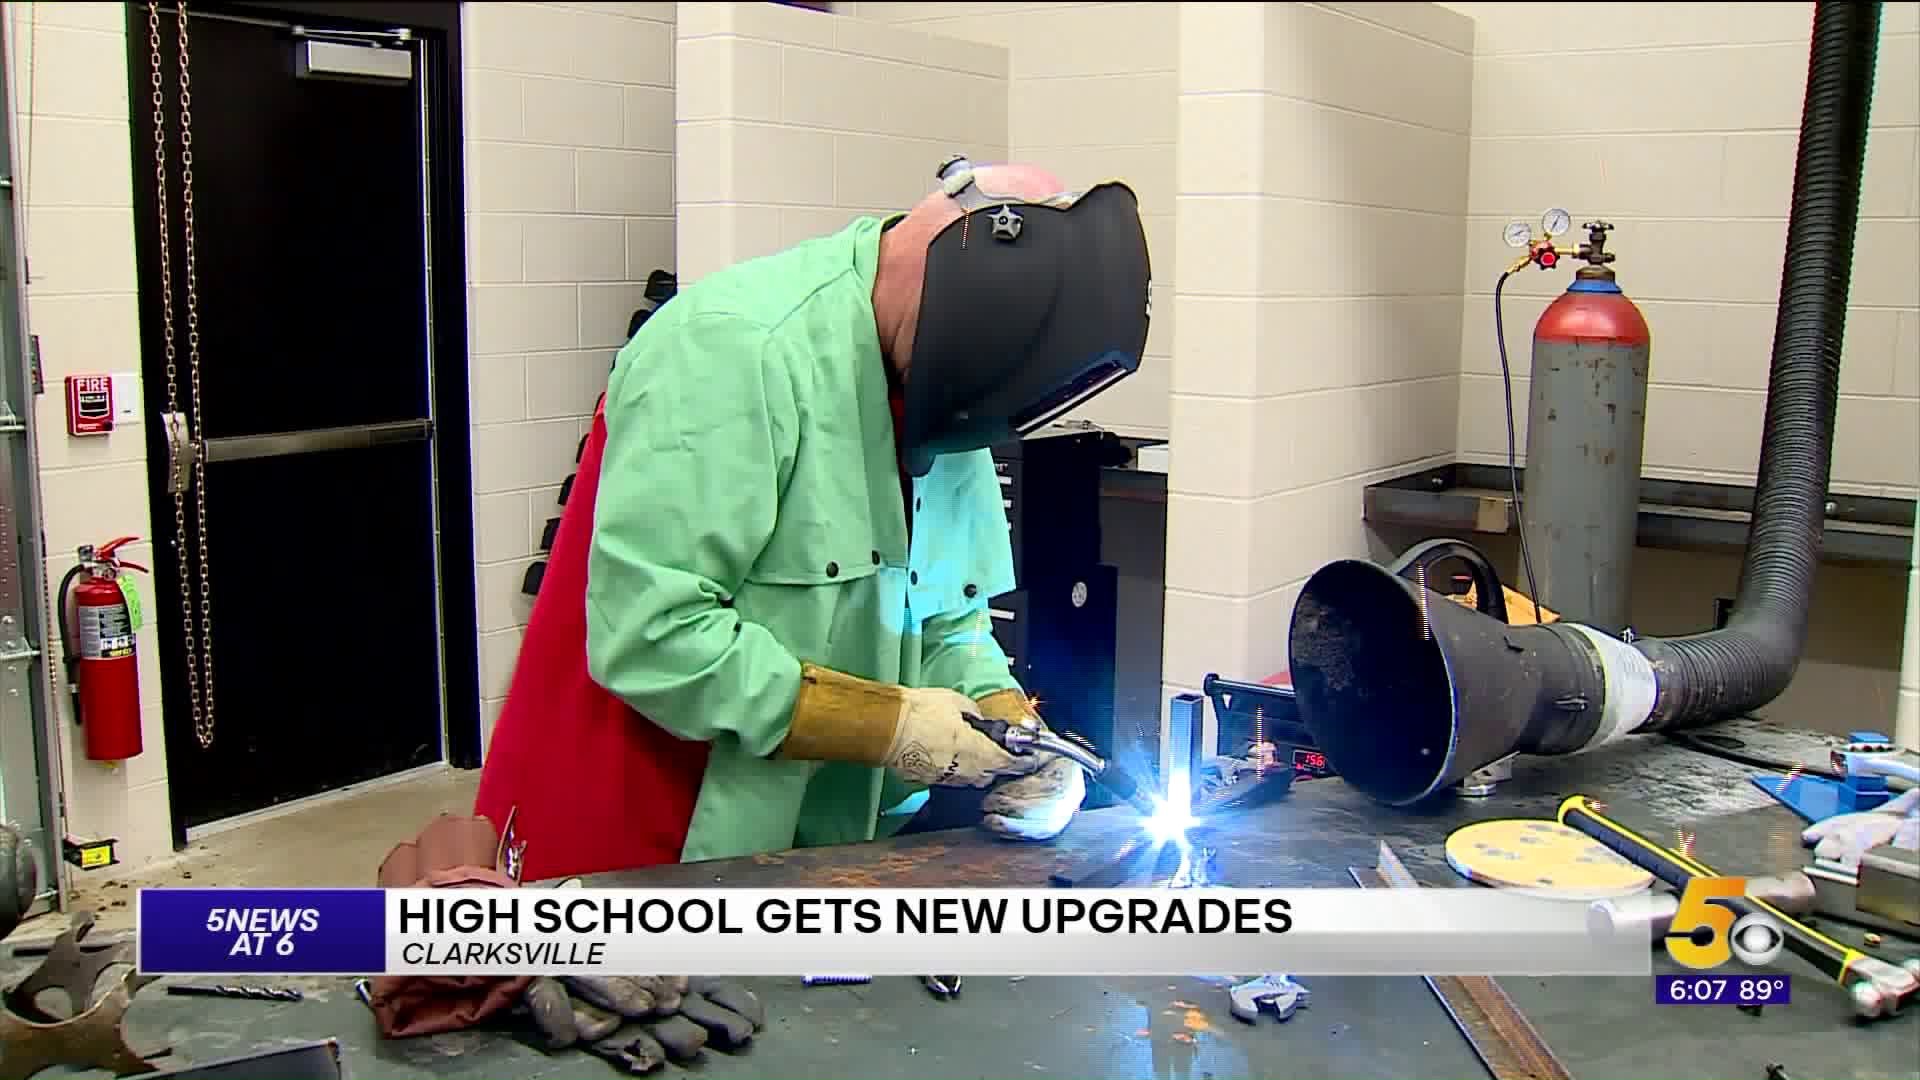 Clarksville High School Gets New Campus And Career Technology Program